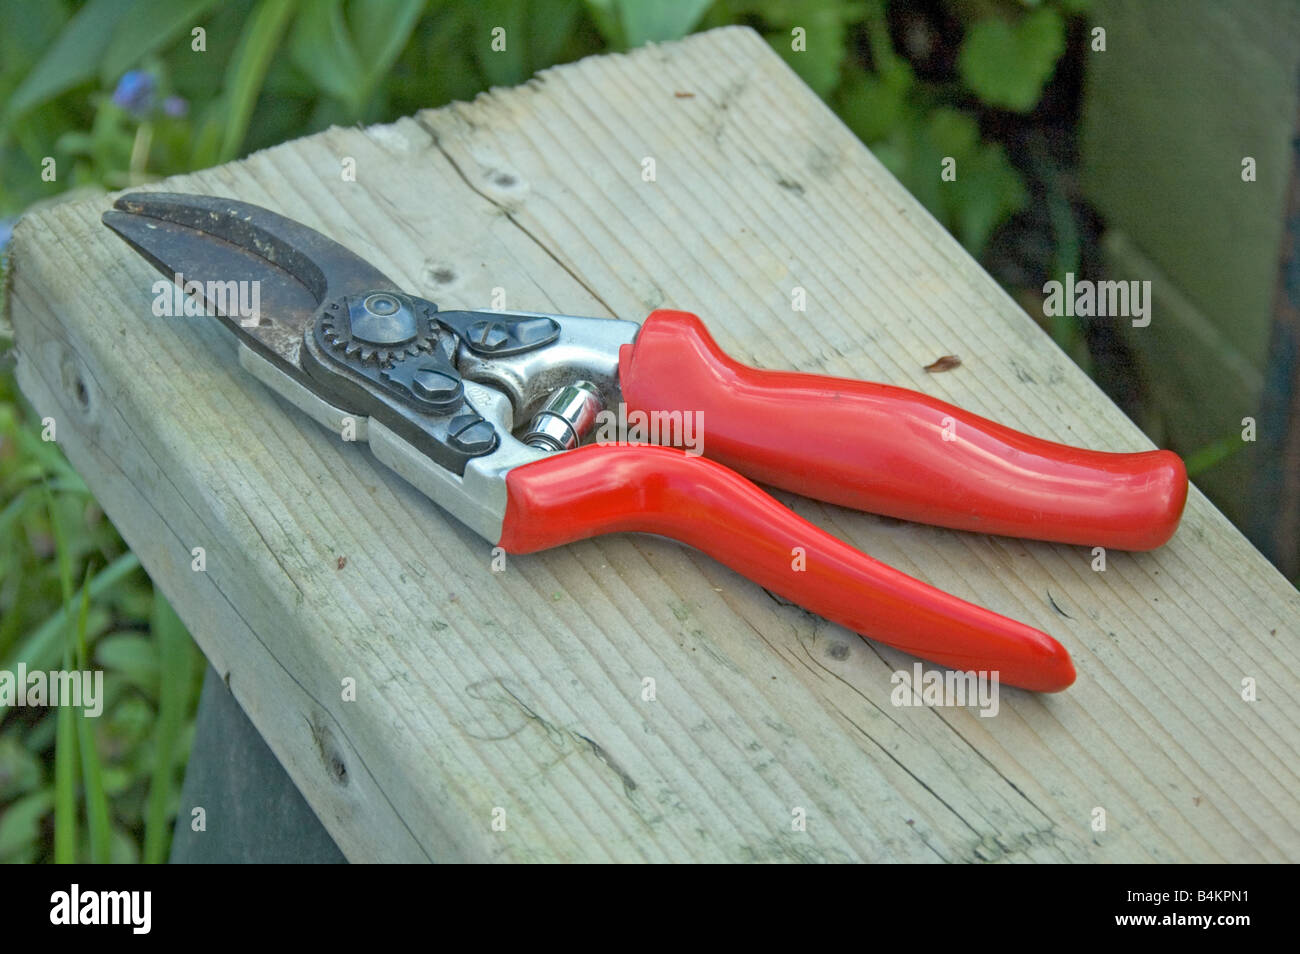 Left handed secateurs on bench Stock Photo